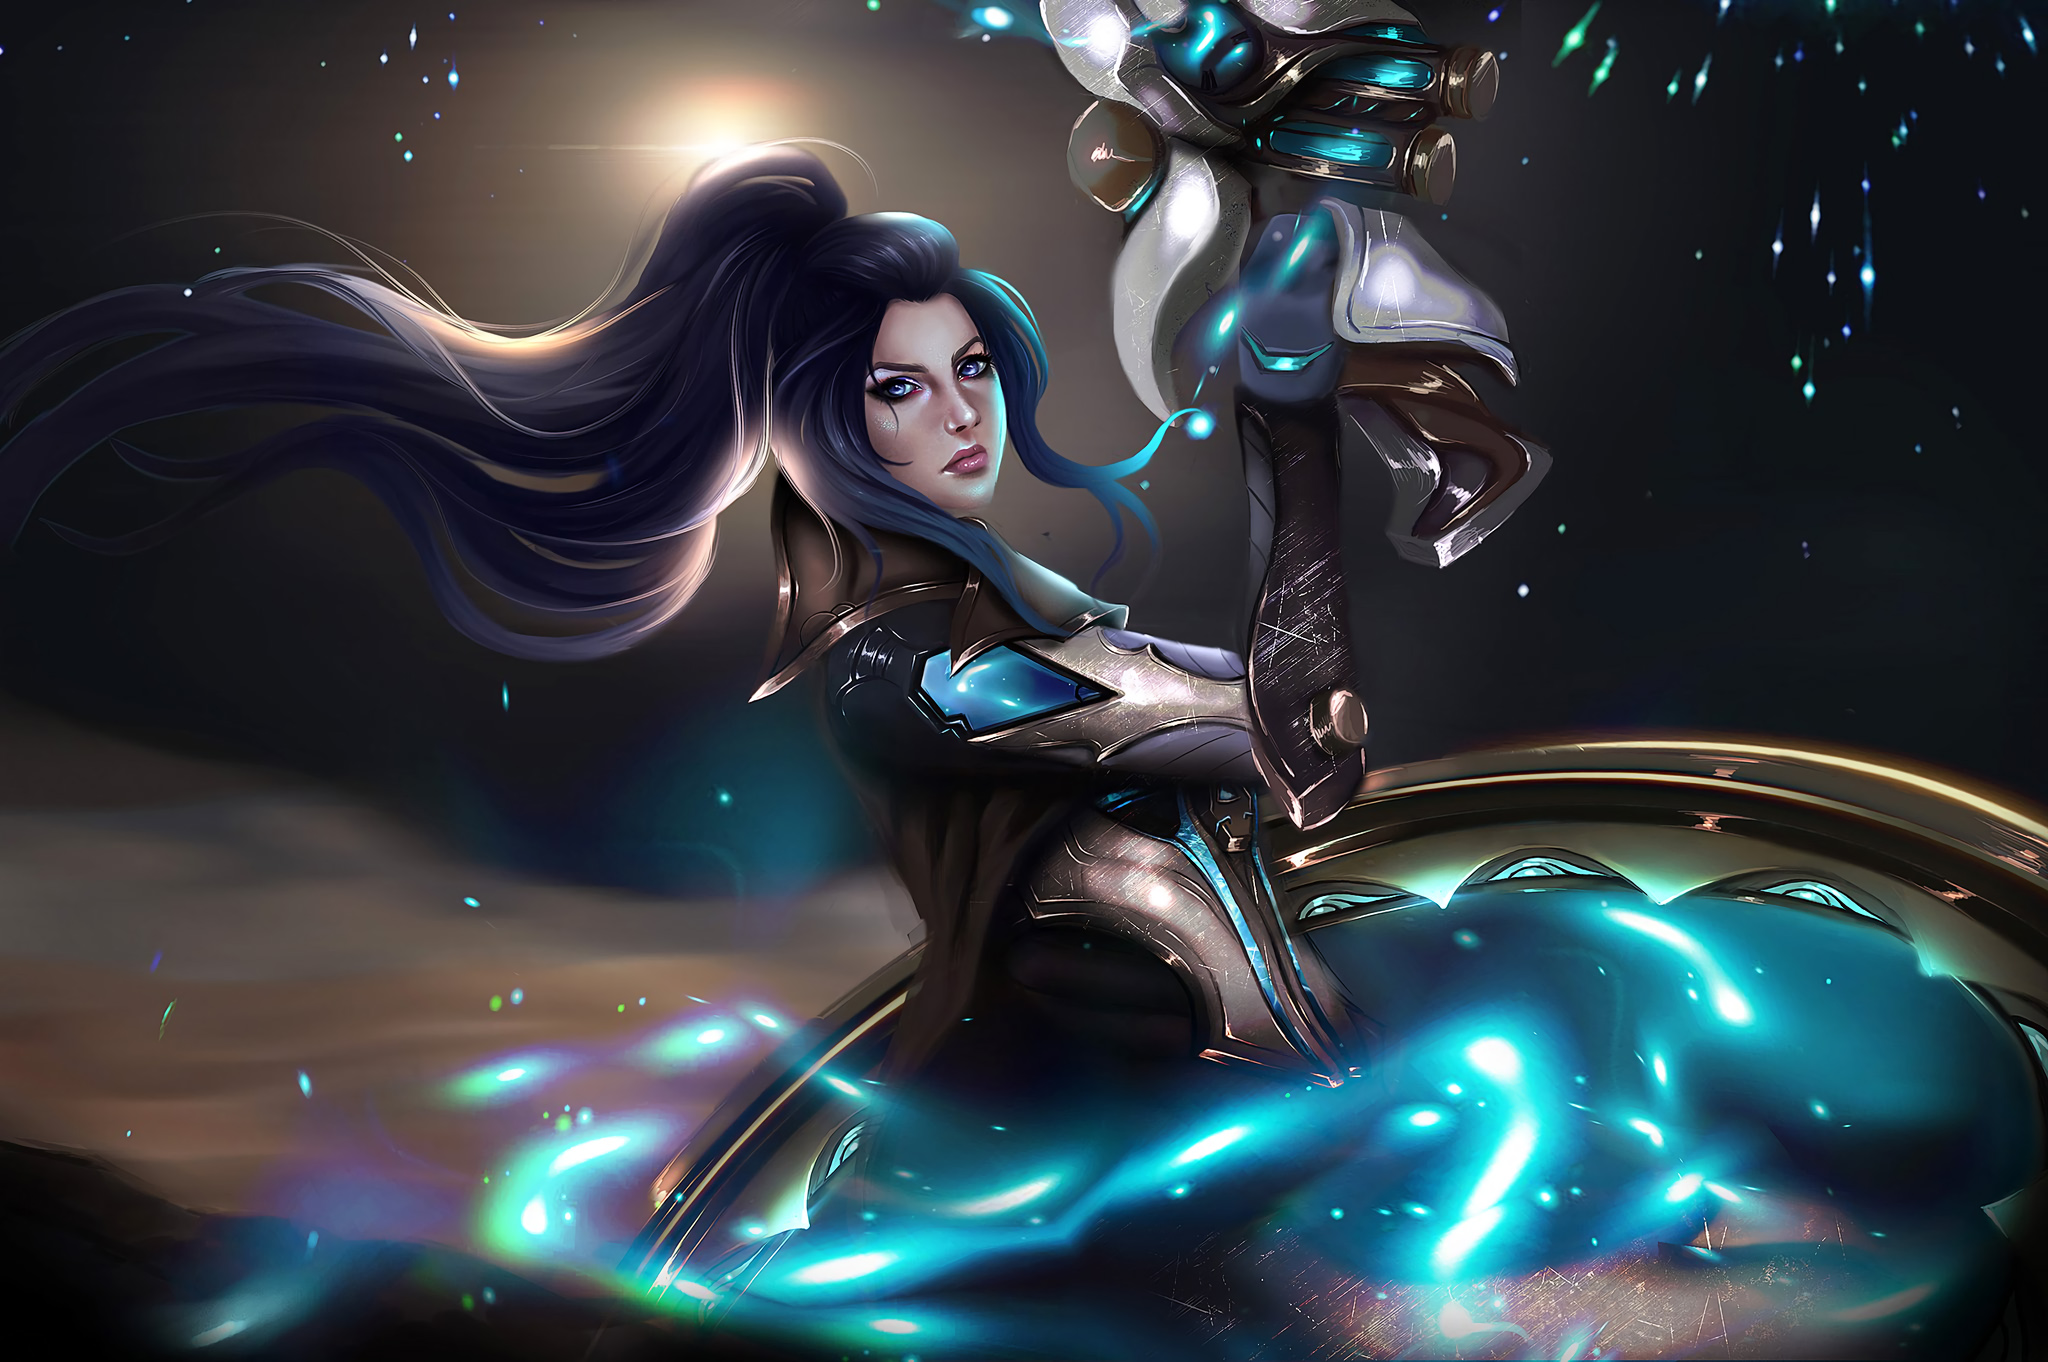 97 Caitlyn League Of Legends Wallpapers On Wallpapersafari Images, Photos, Reviews